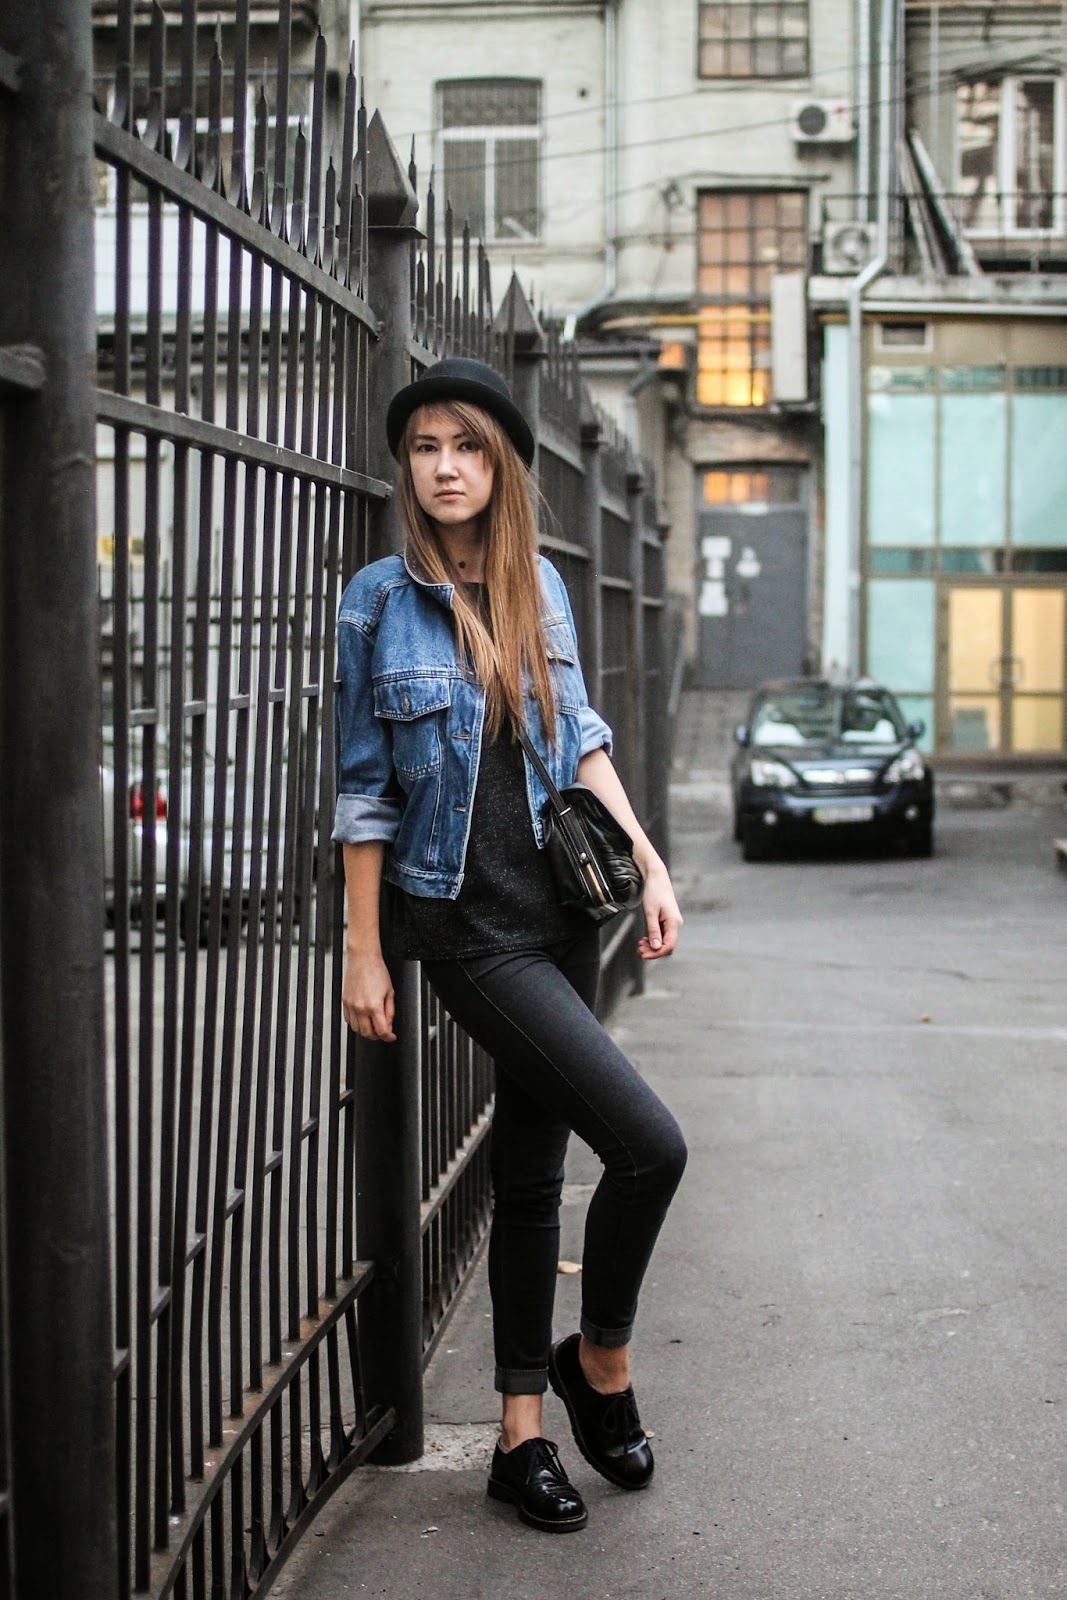 Casual Chic / Black on Black outfit | Jacket outfit women, Black denim  jacket outfit, Black jacket outfit